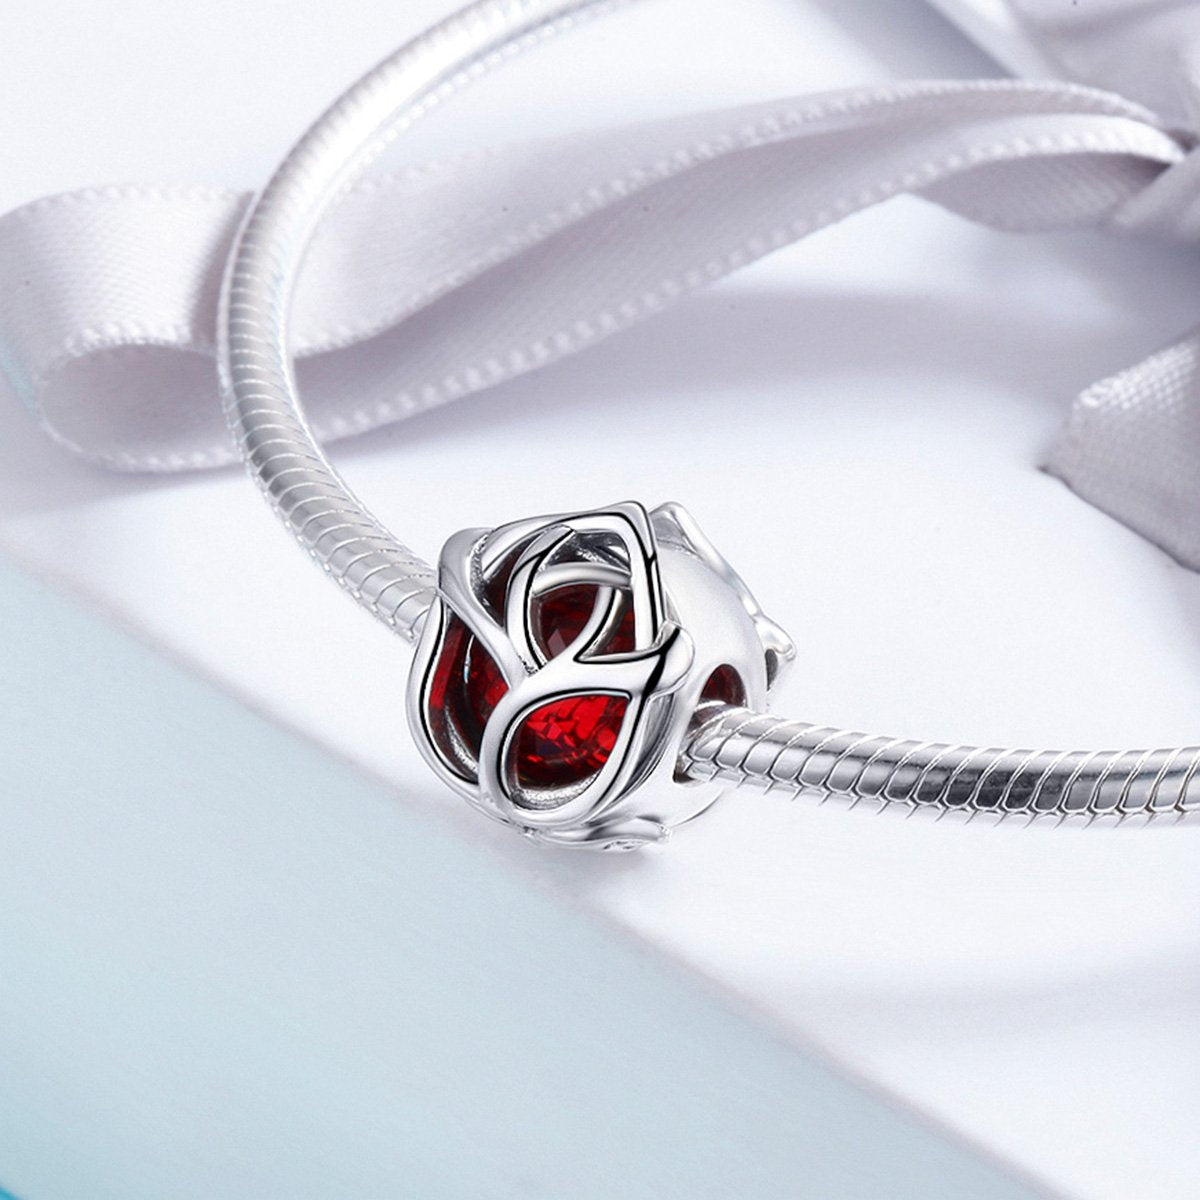 Sterling 925 silver charm the red rose bead pendant fits Pandora charm and European charm bracelet Xaxe.com